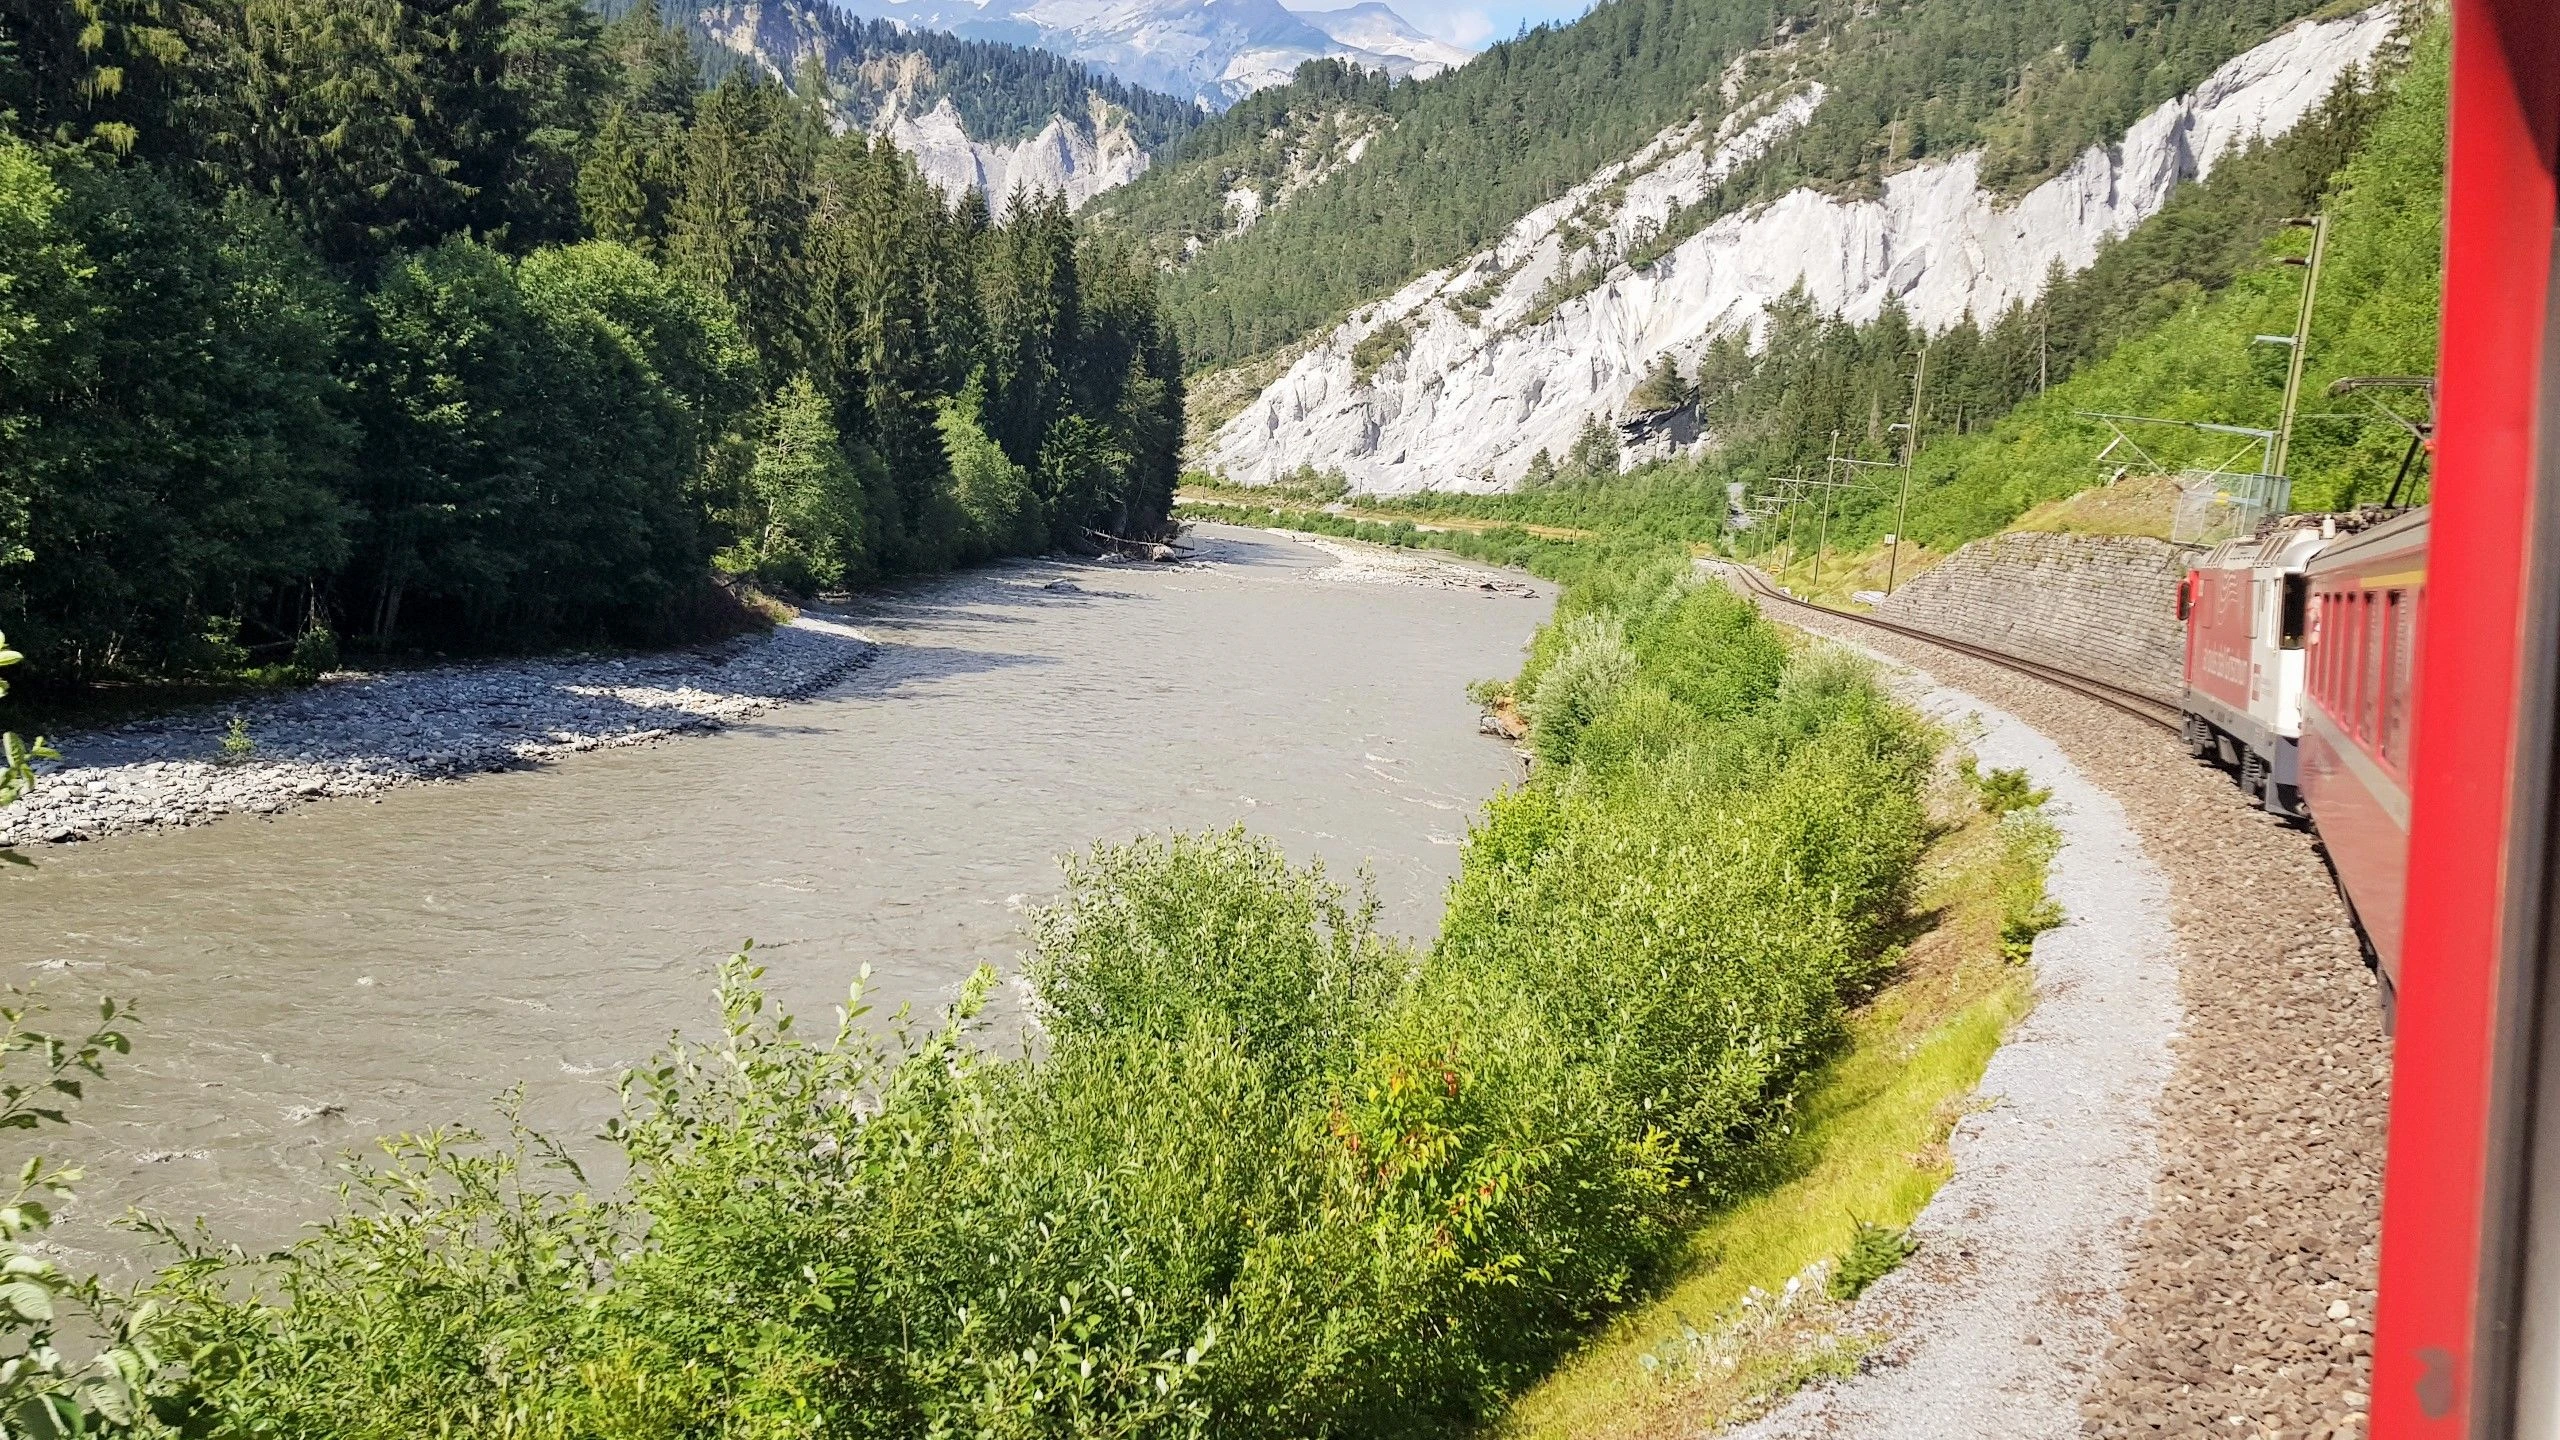 Travelling between Chur and Disentis